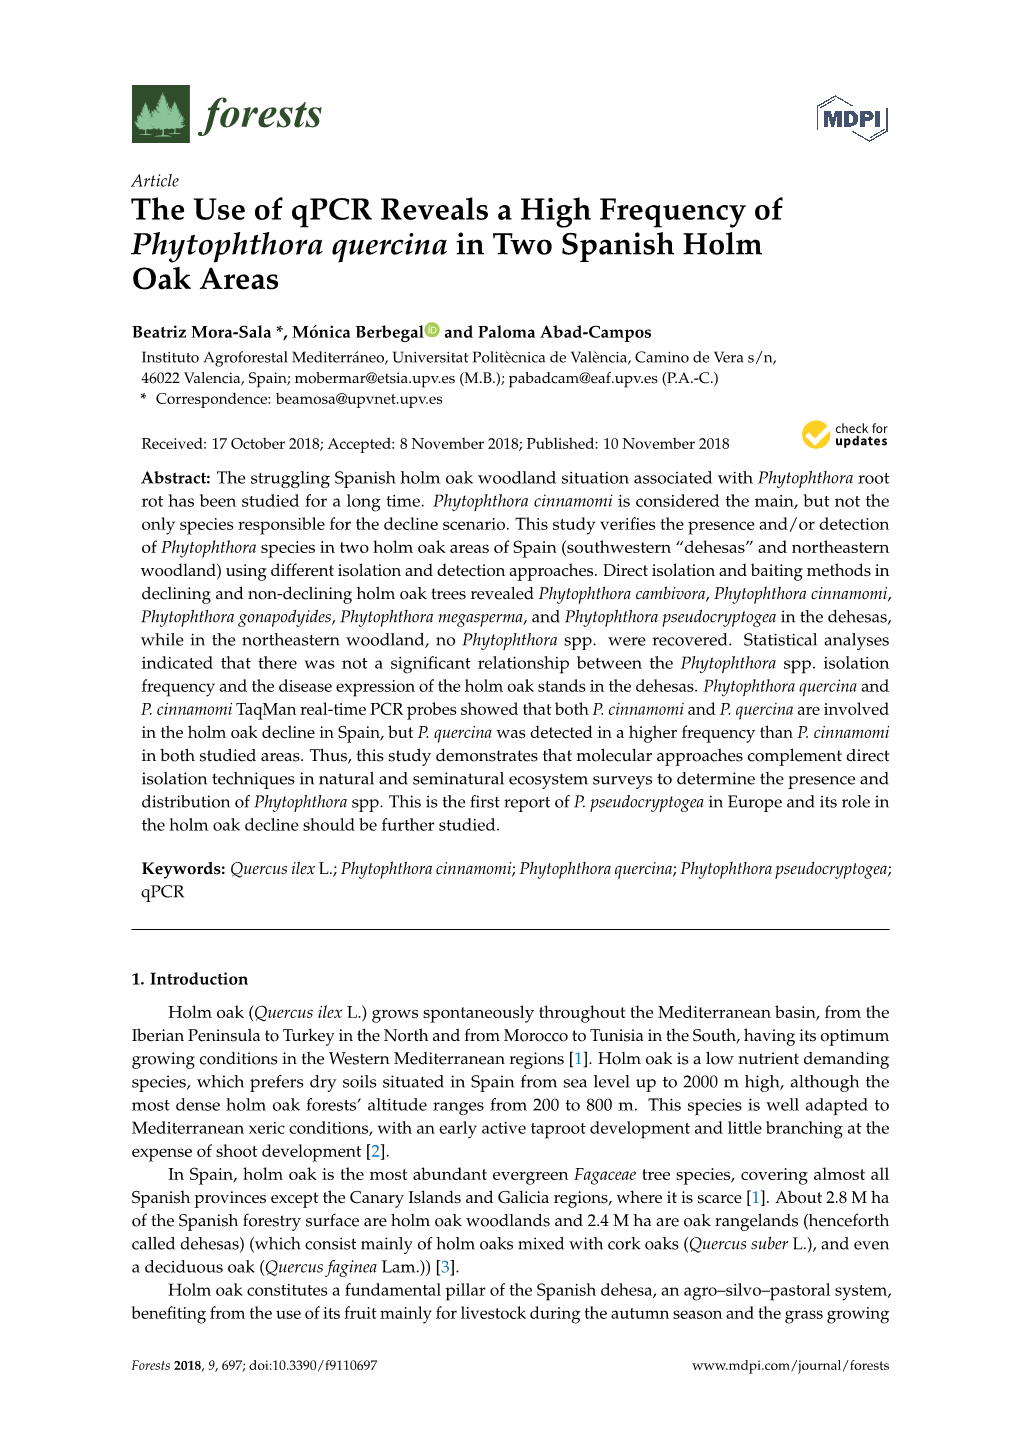 The Use of Qpcr Reveals a High Frequency of Phytophthora Quercina in Two Spanish Holm Oak Areas